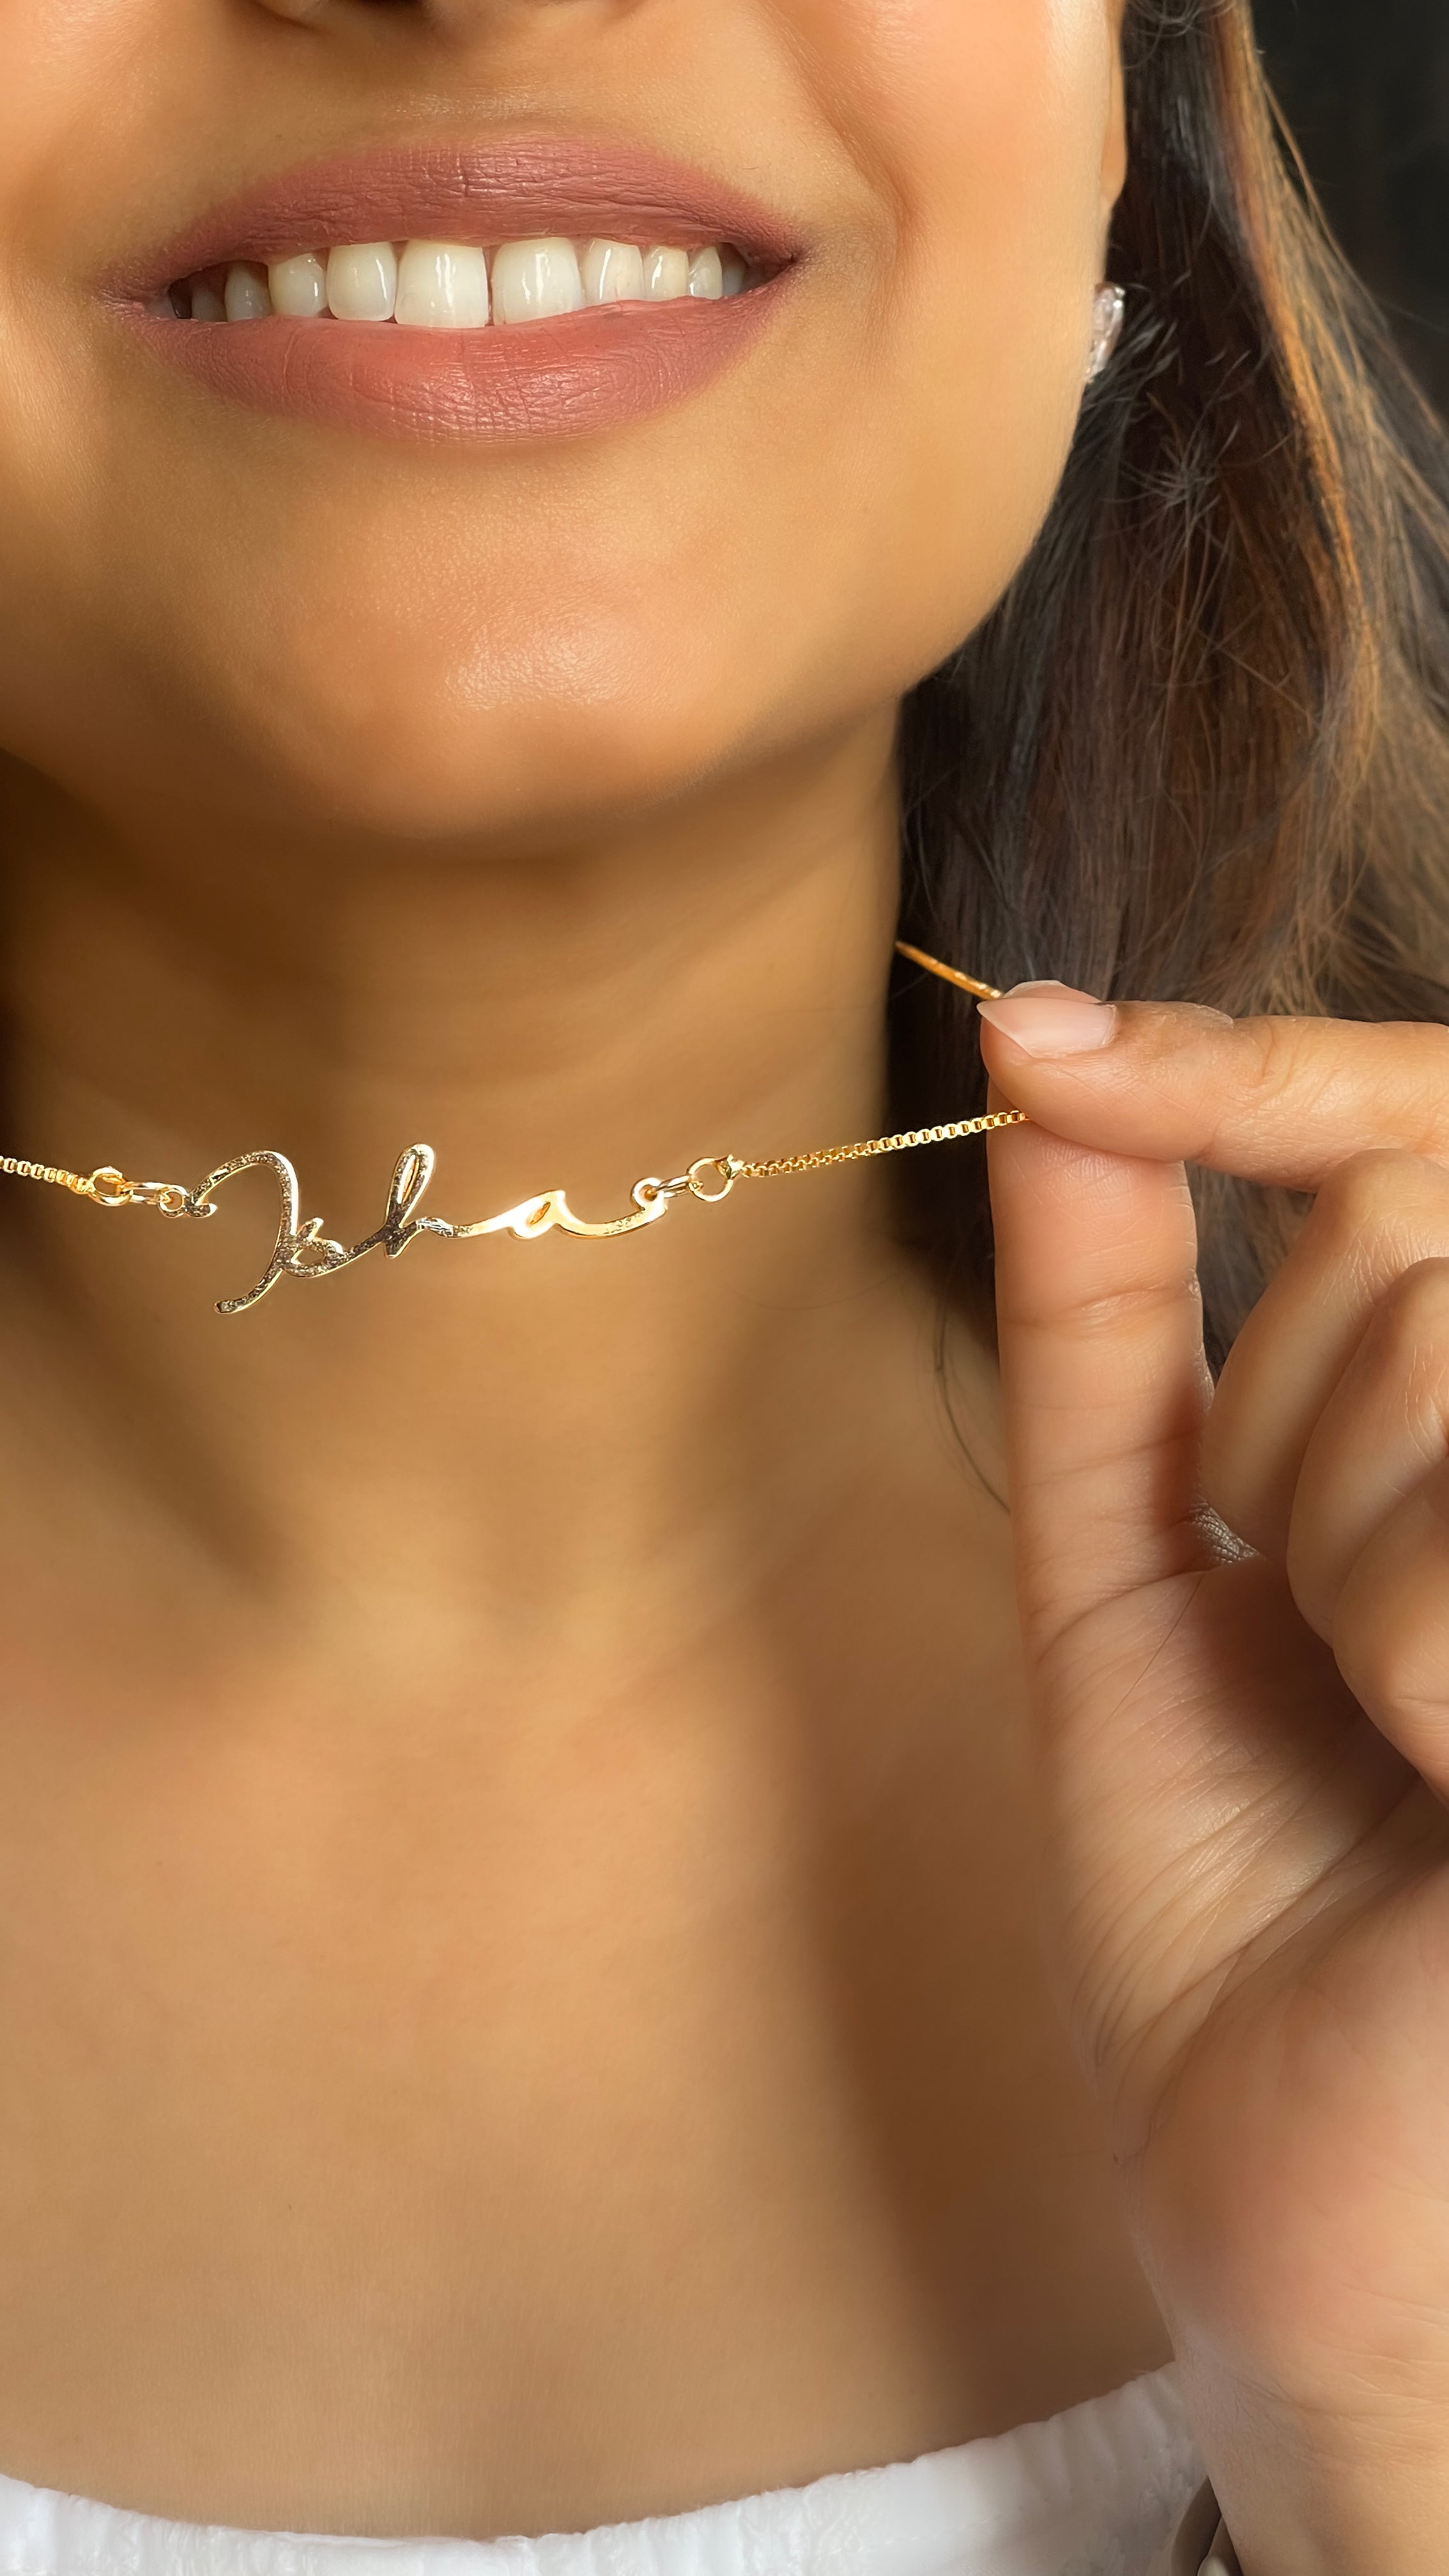 Personalised Name Necklace - Gold